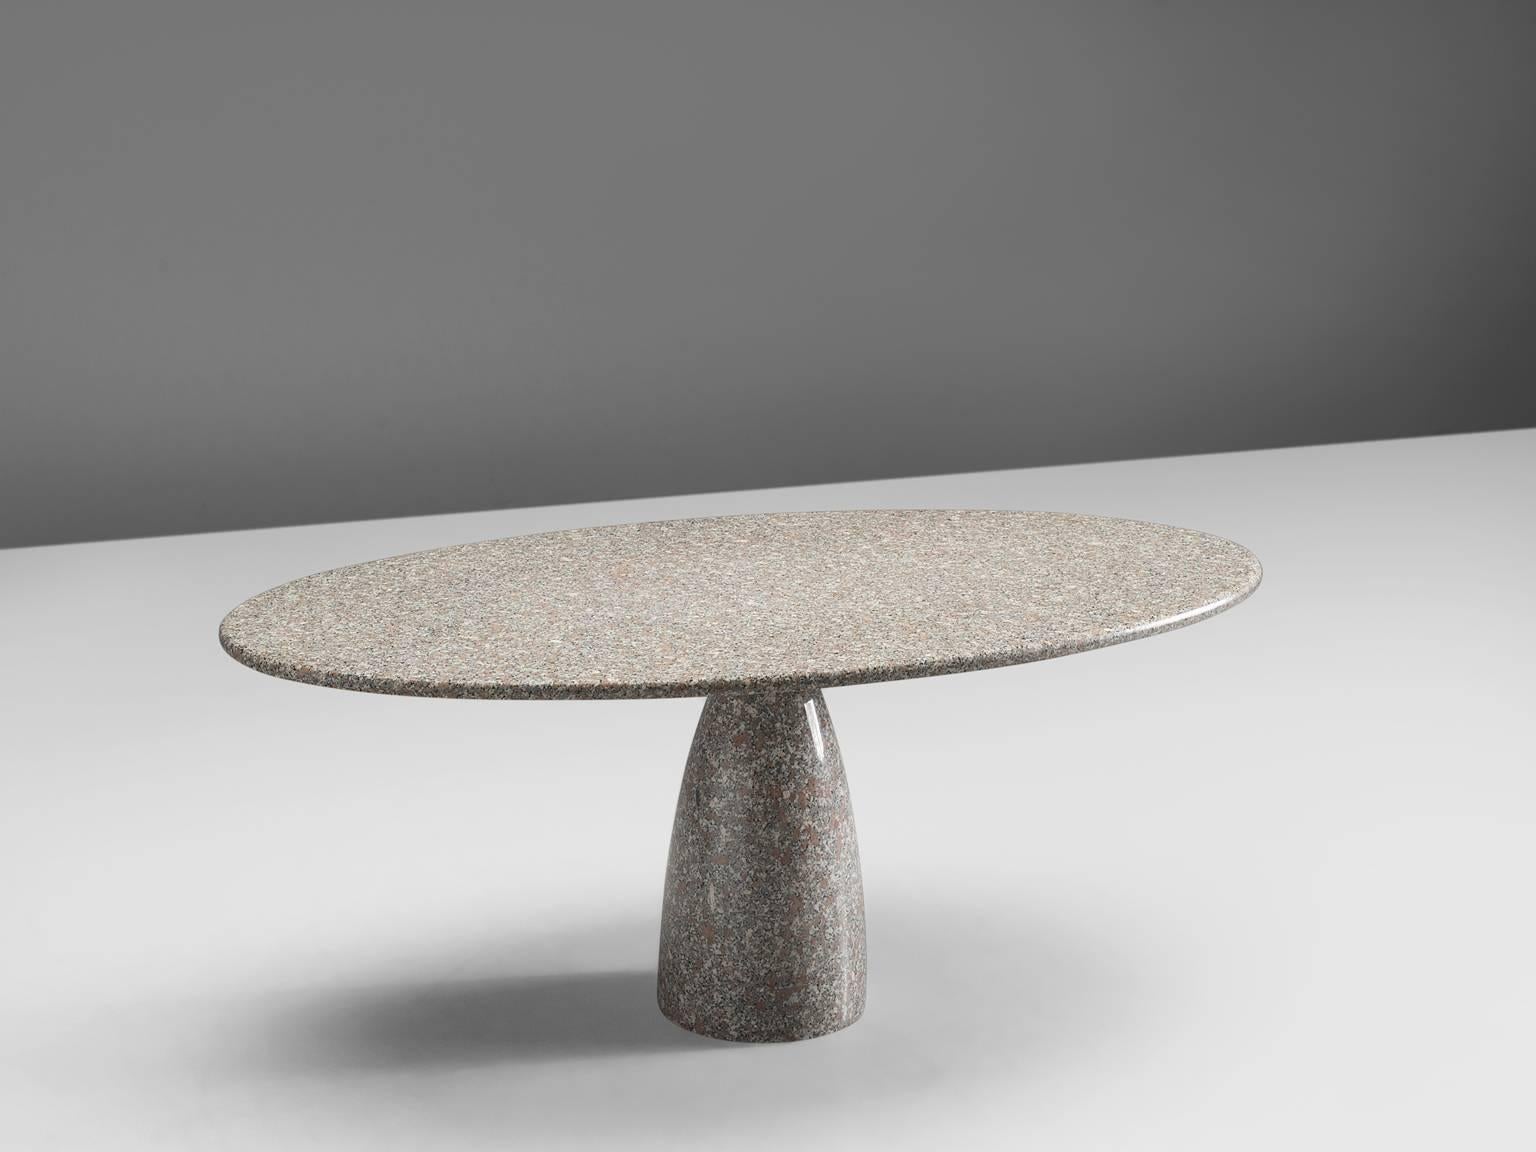 Dining table, granite, Italy, 1970s design, later production.

This oval dining table is executed in the high quality Italian granite with wonderful white, brown and black speckles. The thick tabletop is supported by a colon-shaped single foot that